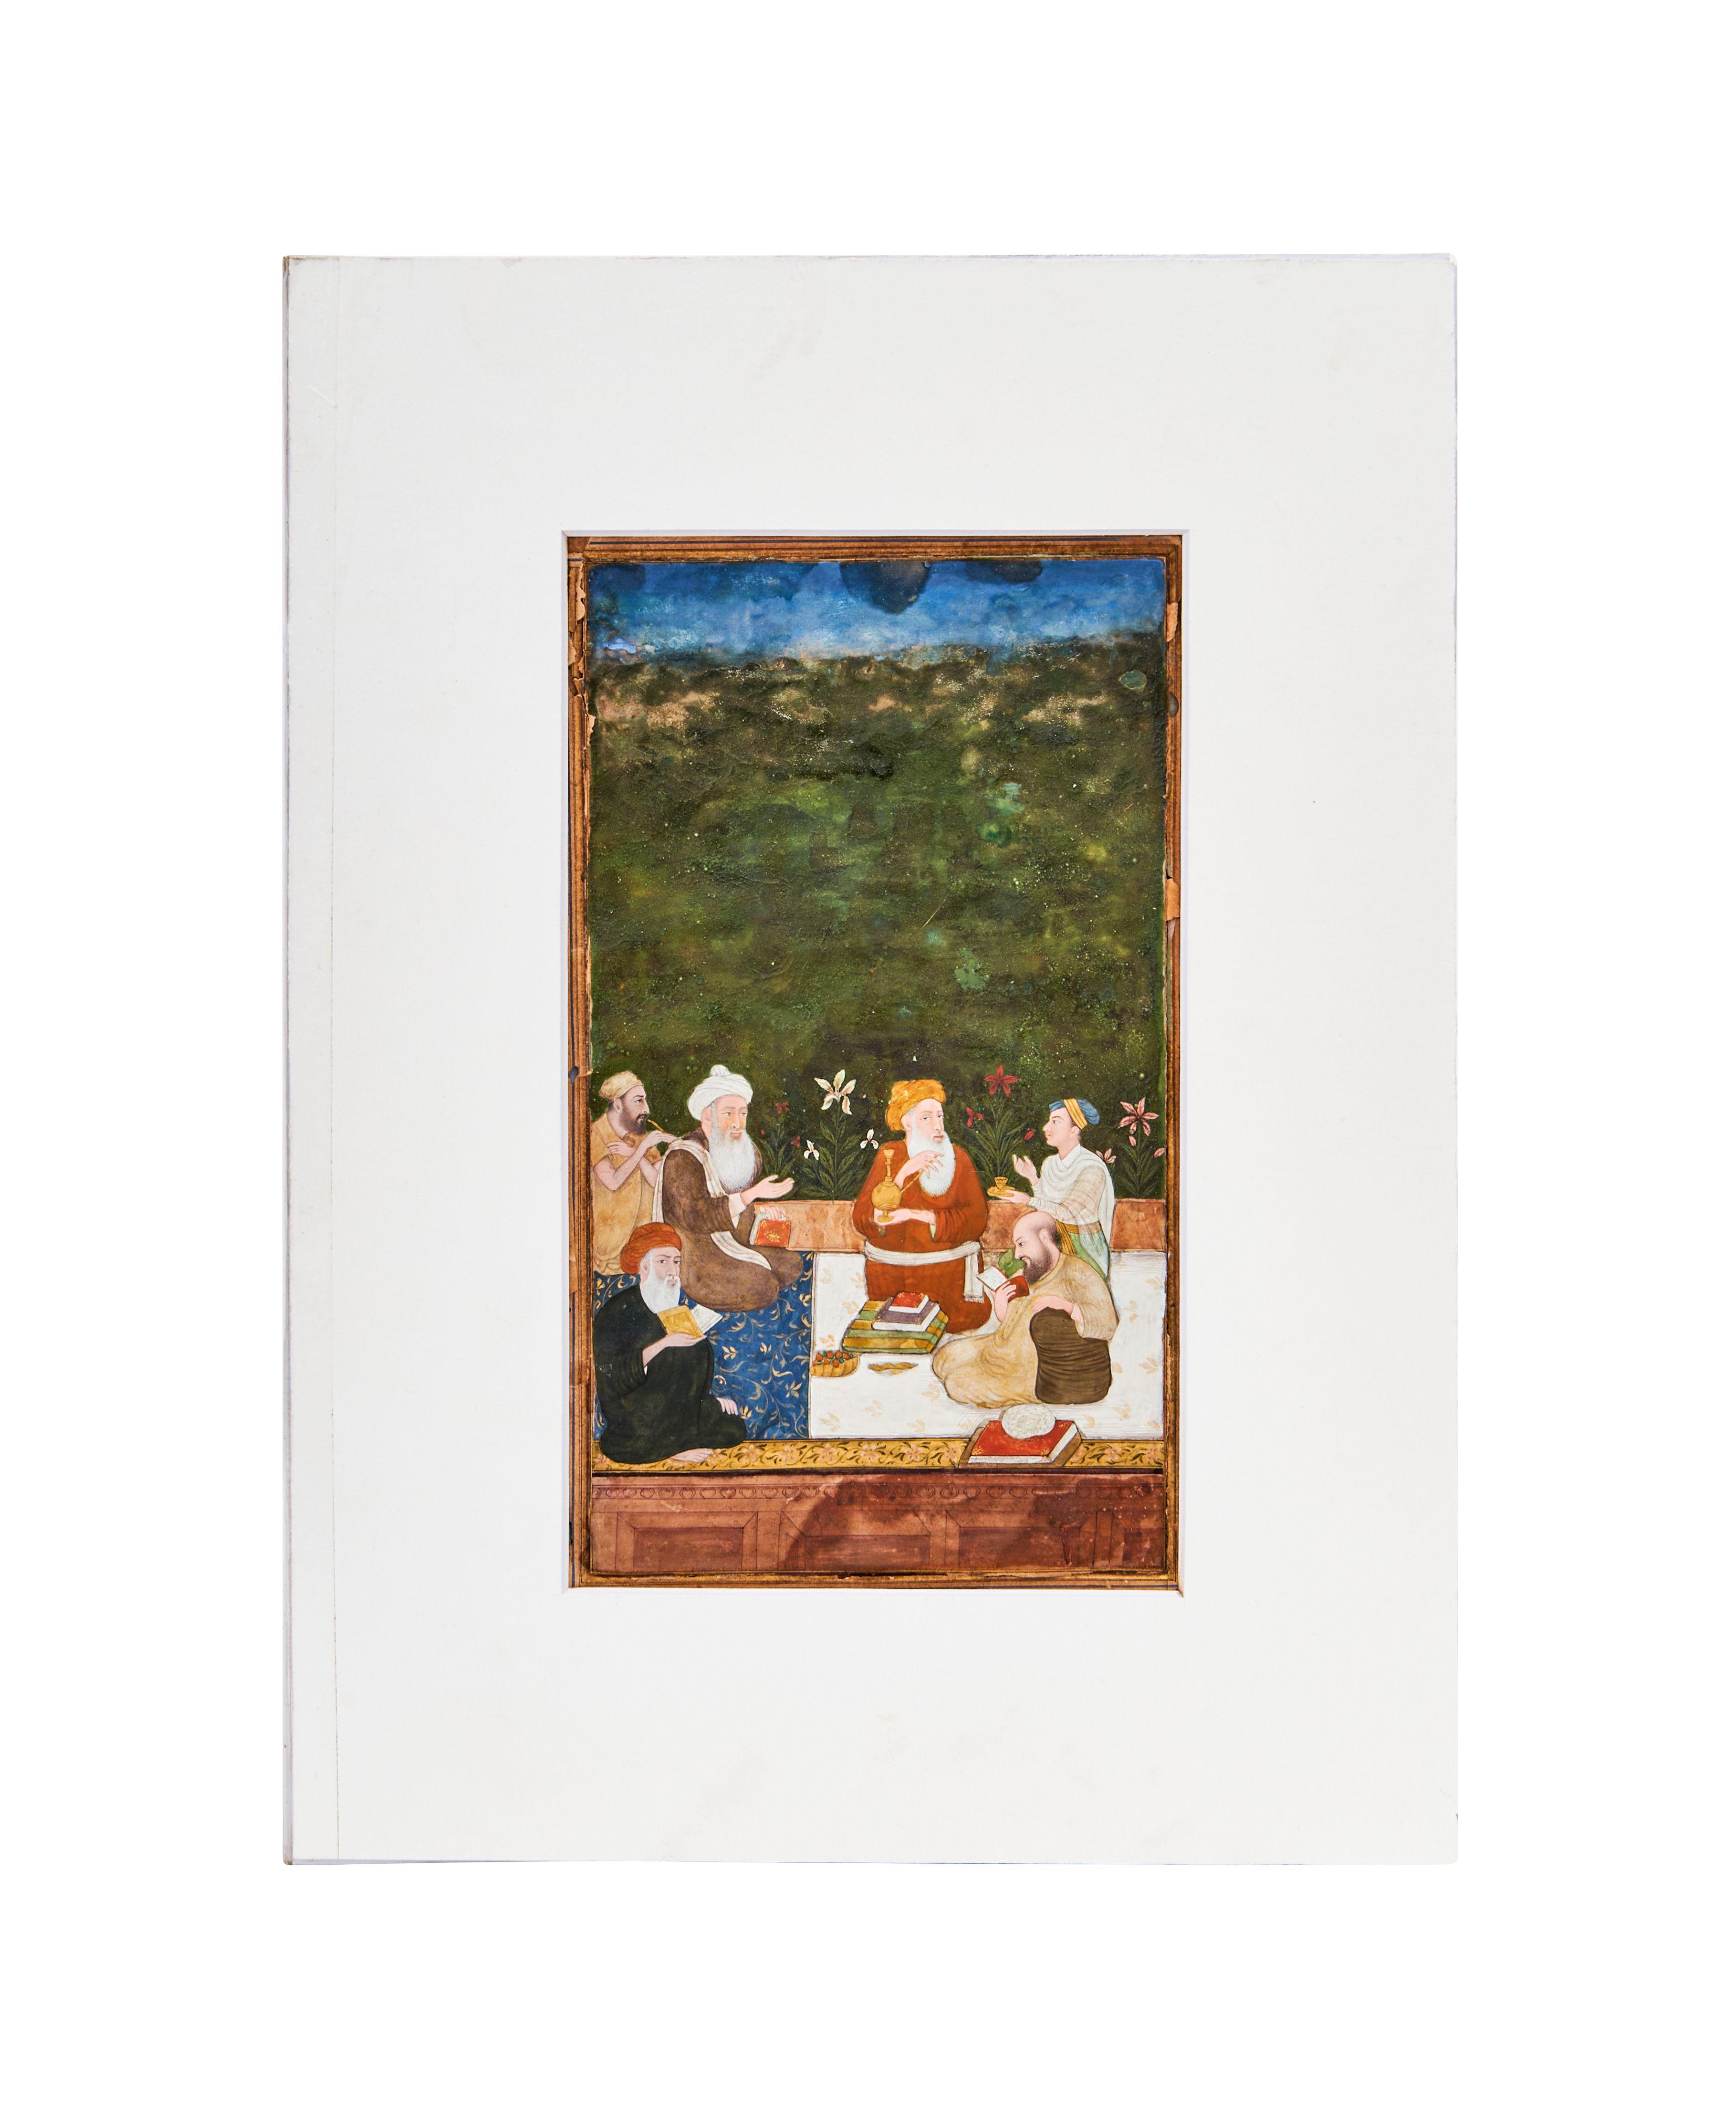 Indian Miniature Depicting Sheiks & Attendents, Mughal, India,18th Century, - Image 2 of 4